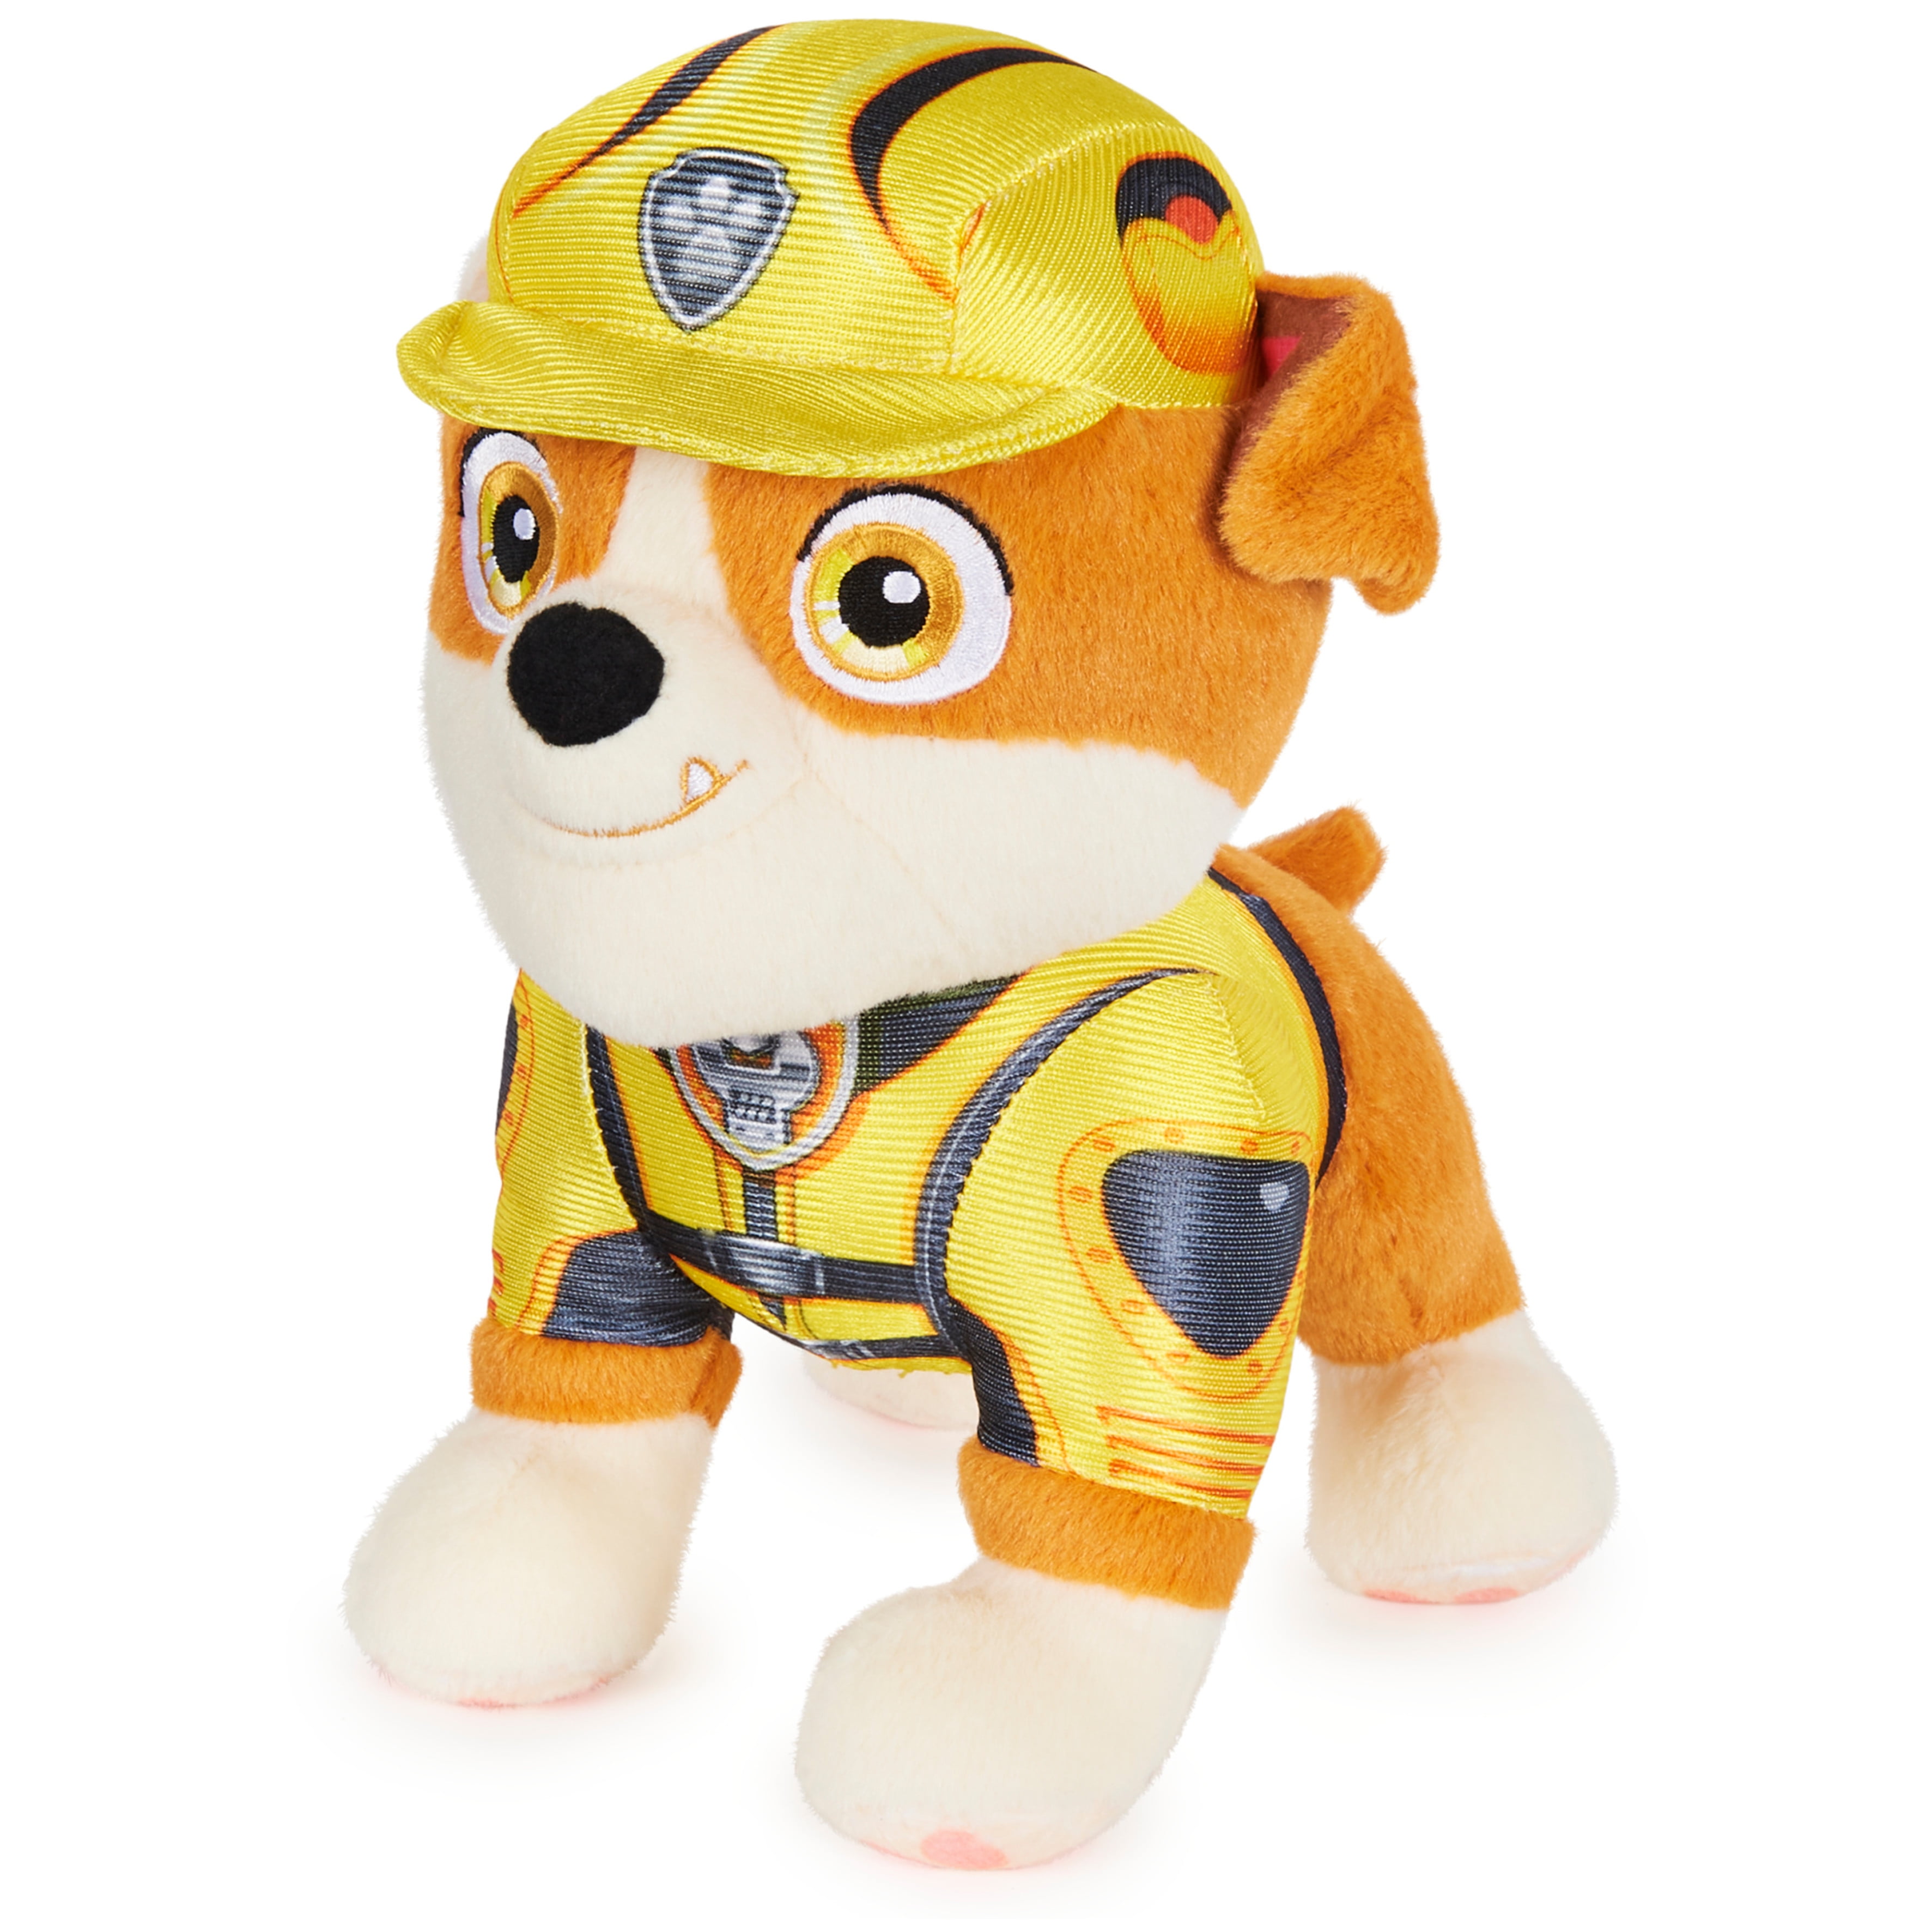 Buy Paw Patrol The Movie Rubble 8 Inch Plush Toy For Kids Ages 3 And